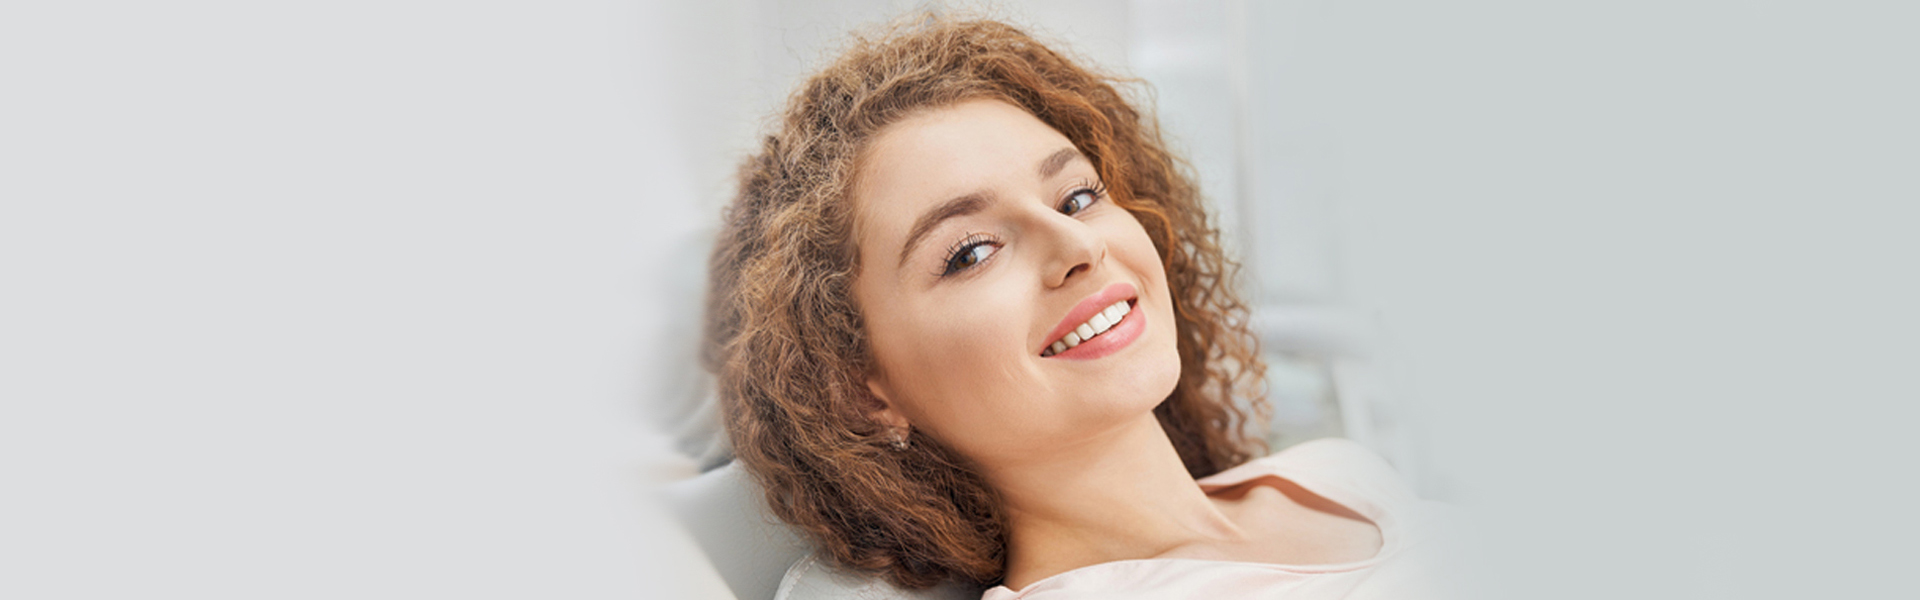 Teeth Whitening: What You Need to Know Before Getting Started